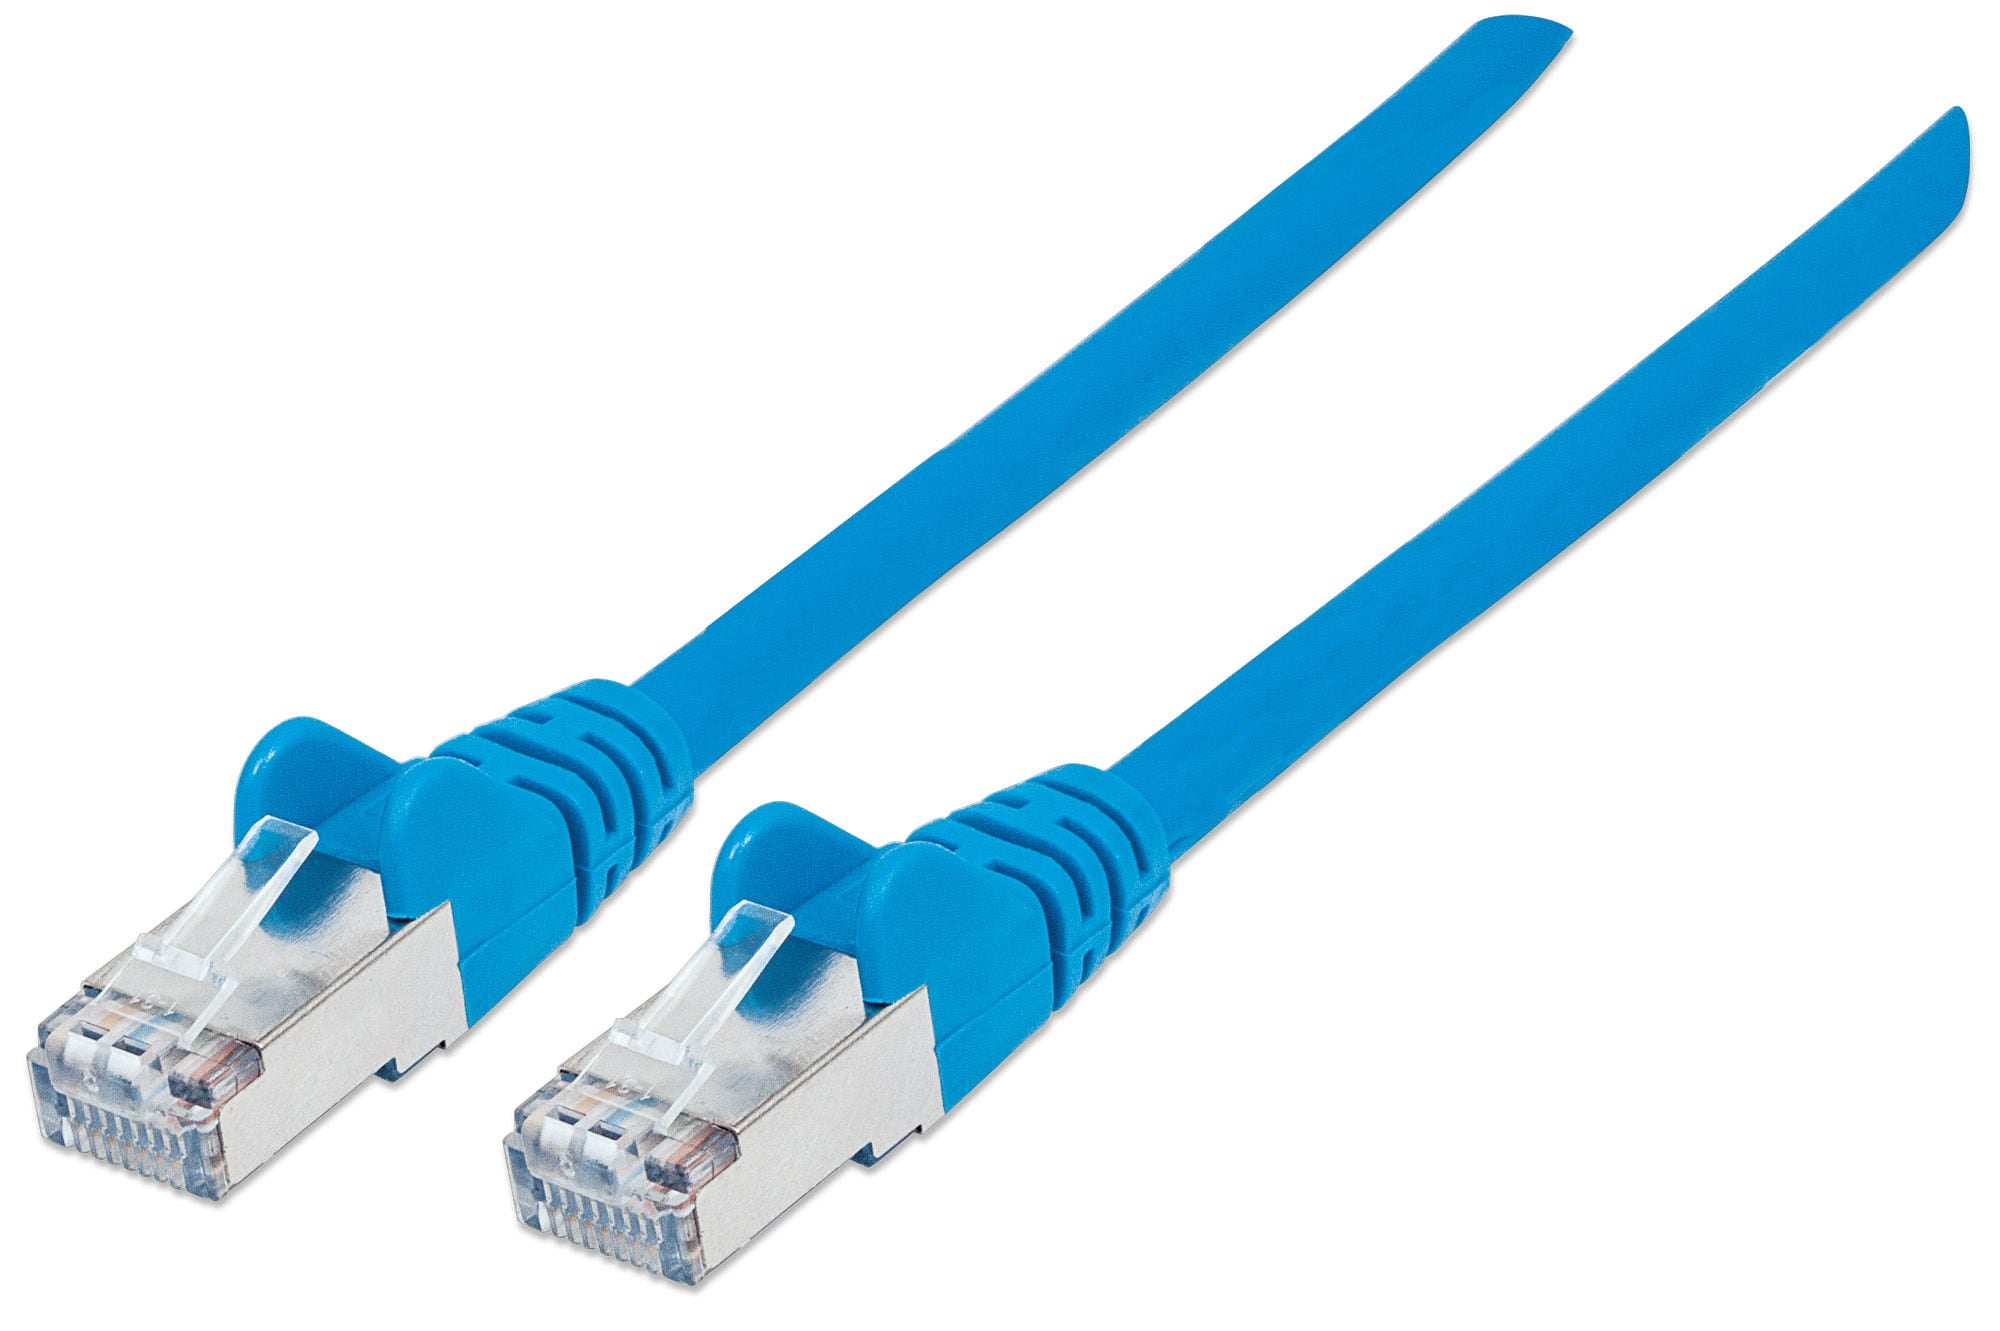 Intellinet Network Patch Cable, Cat6A, 1m, Blue, Copper, S/FTP, LSOH / LSZH, PVC, RJ45, Gold Plated Contacts, Snagless, Booted, Lifetime Warranty, Polybag